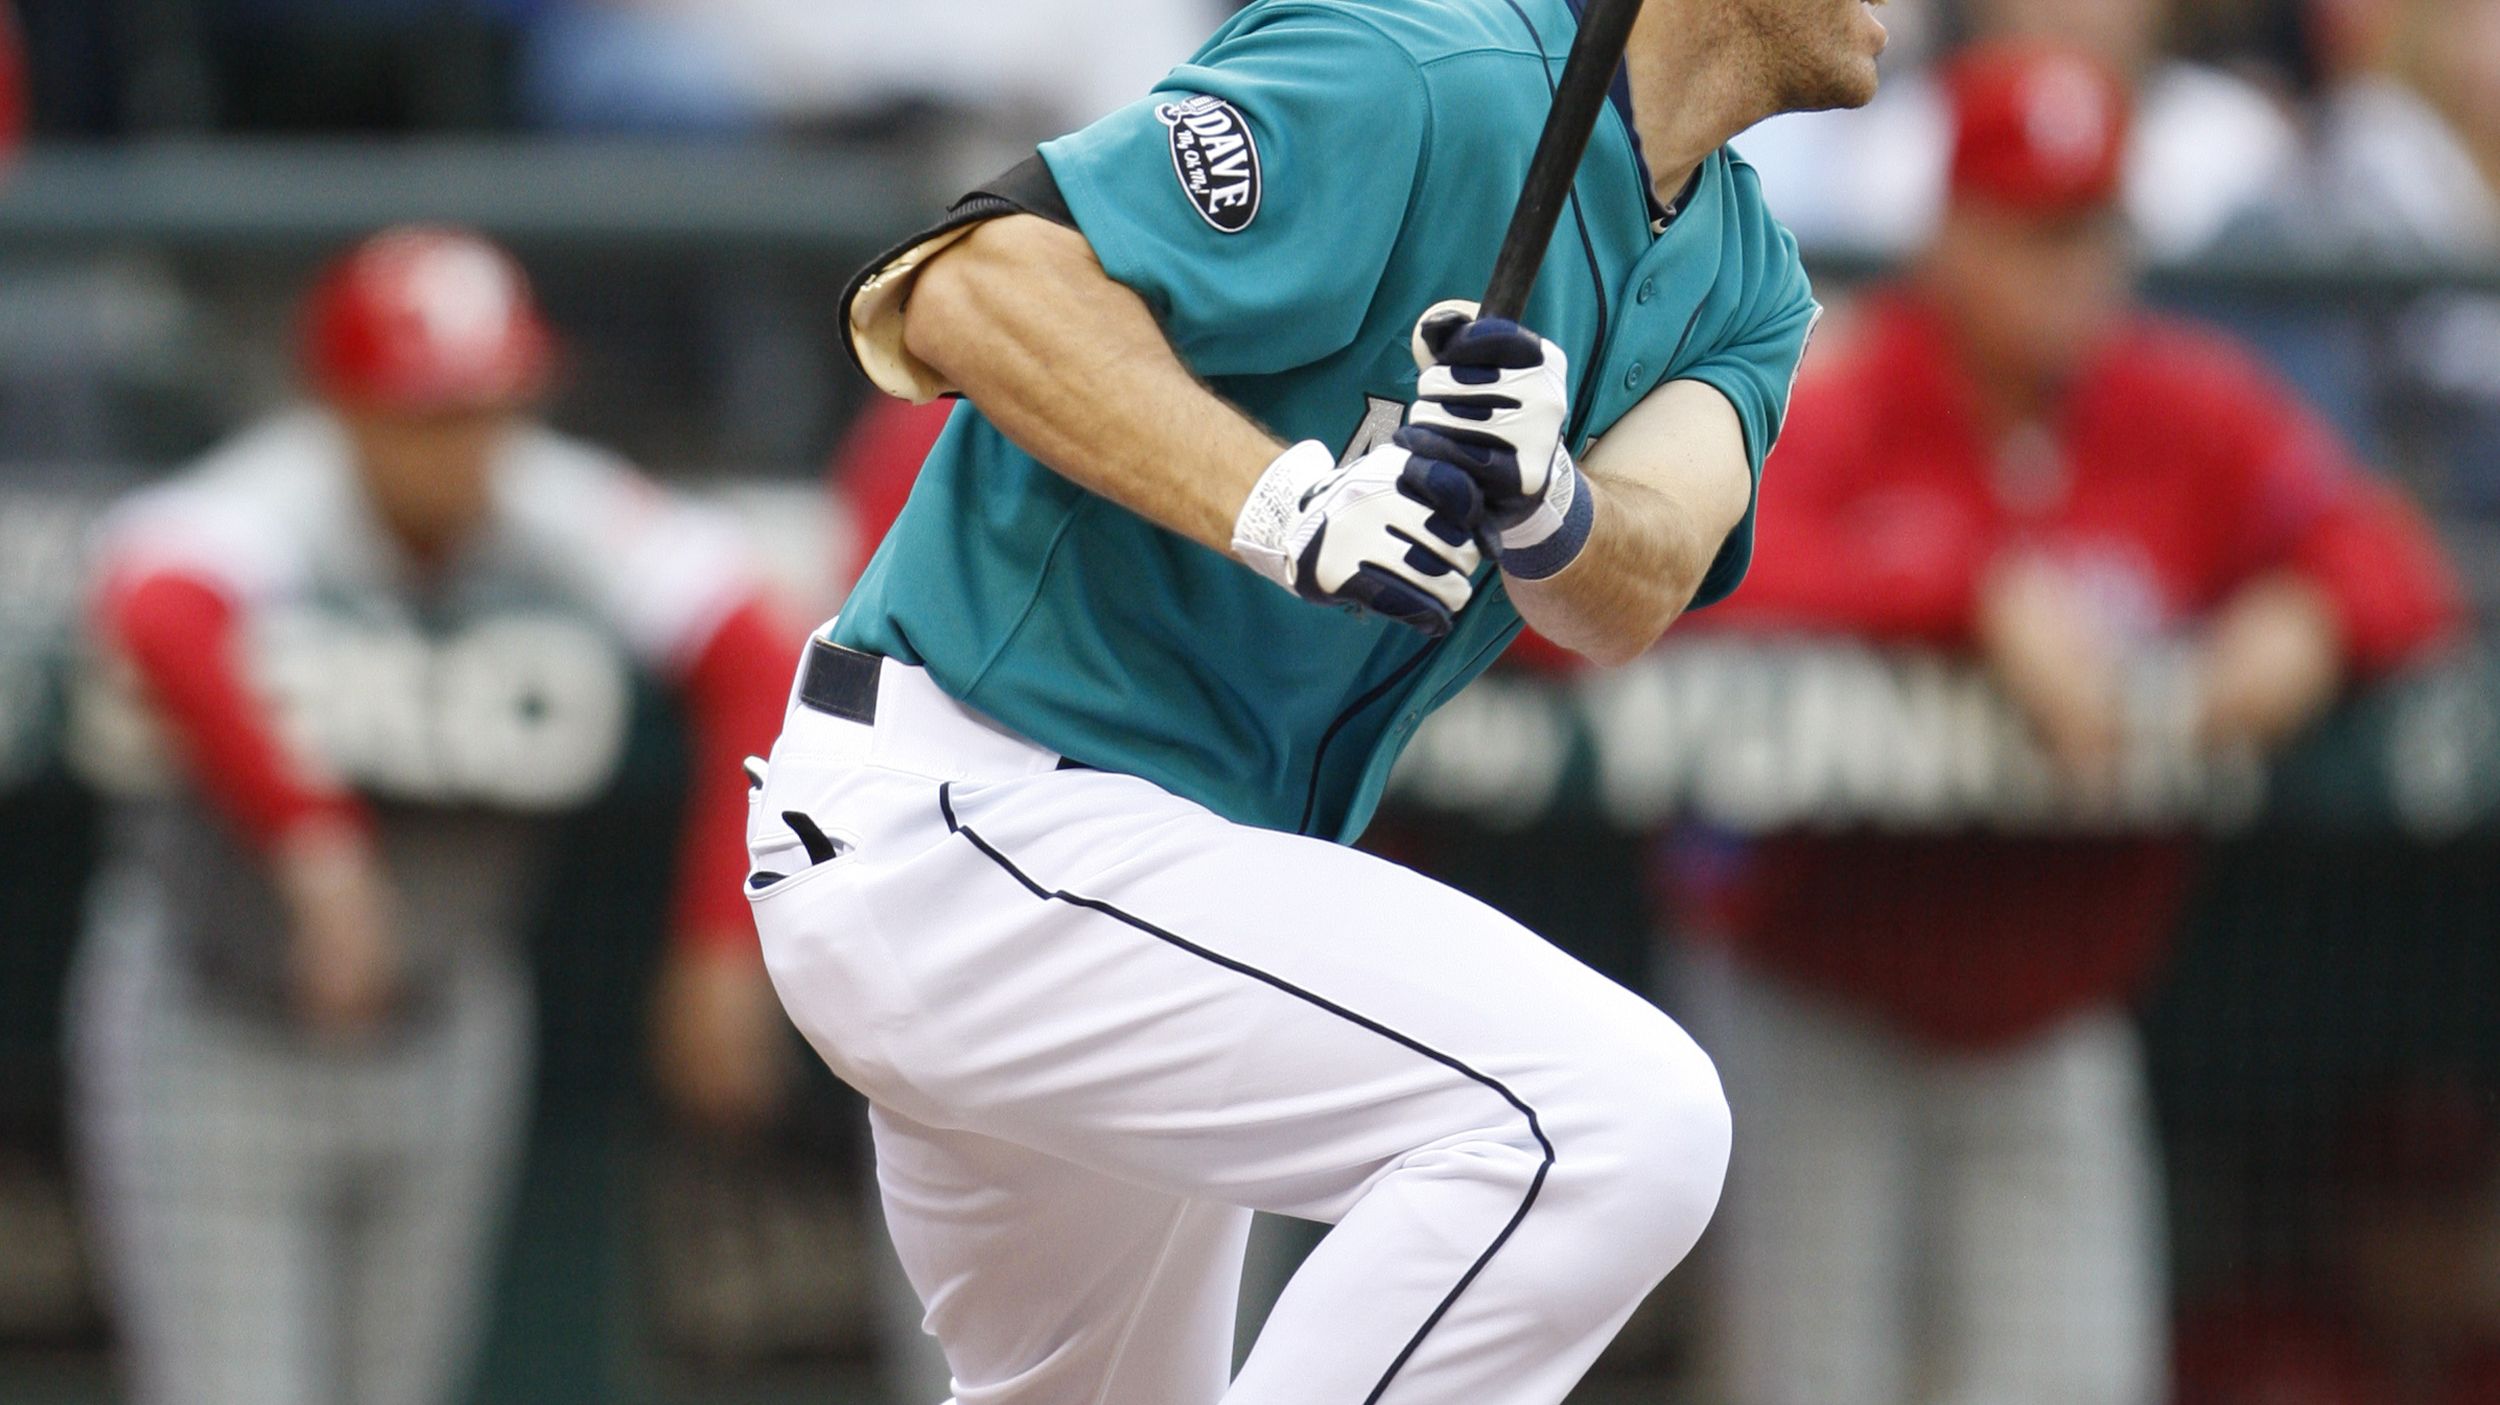 Dustin Ackley: A Look at His Young Career and Bright Future